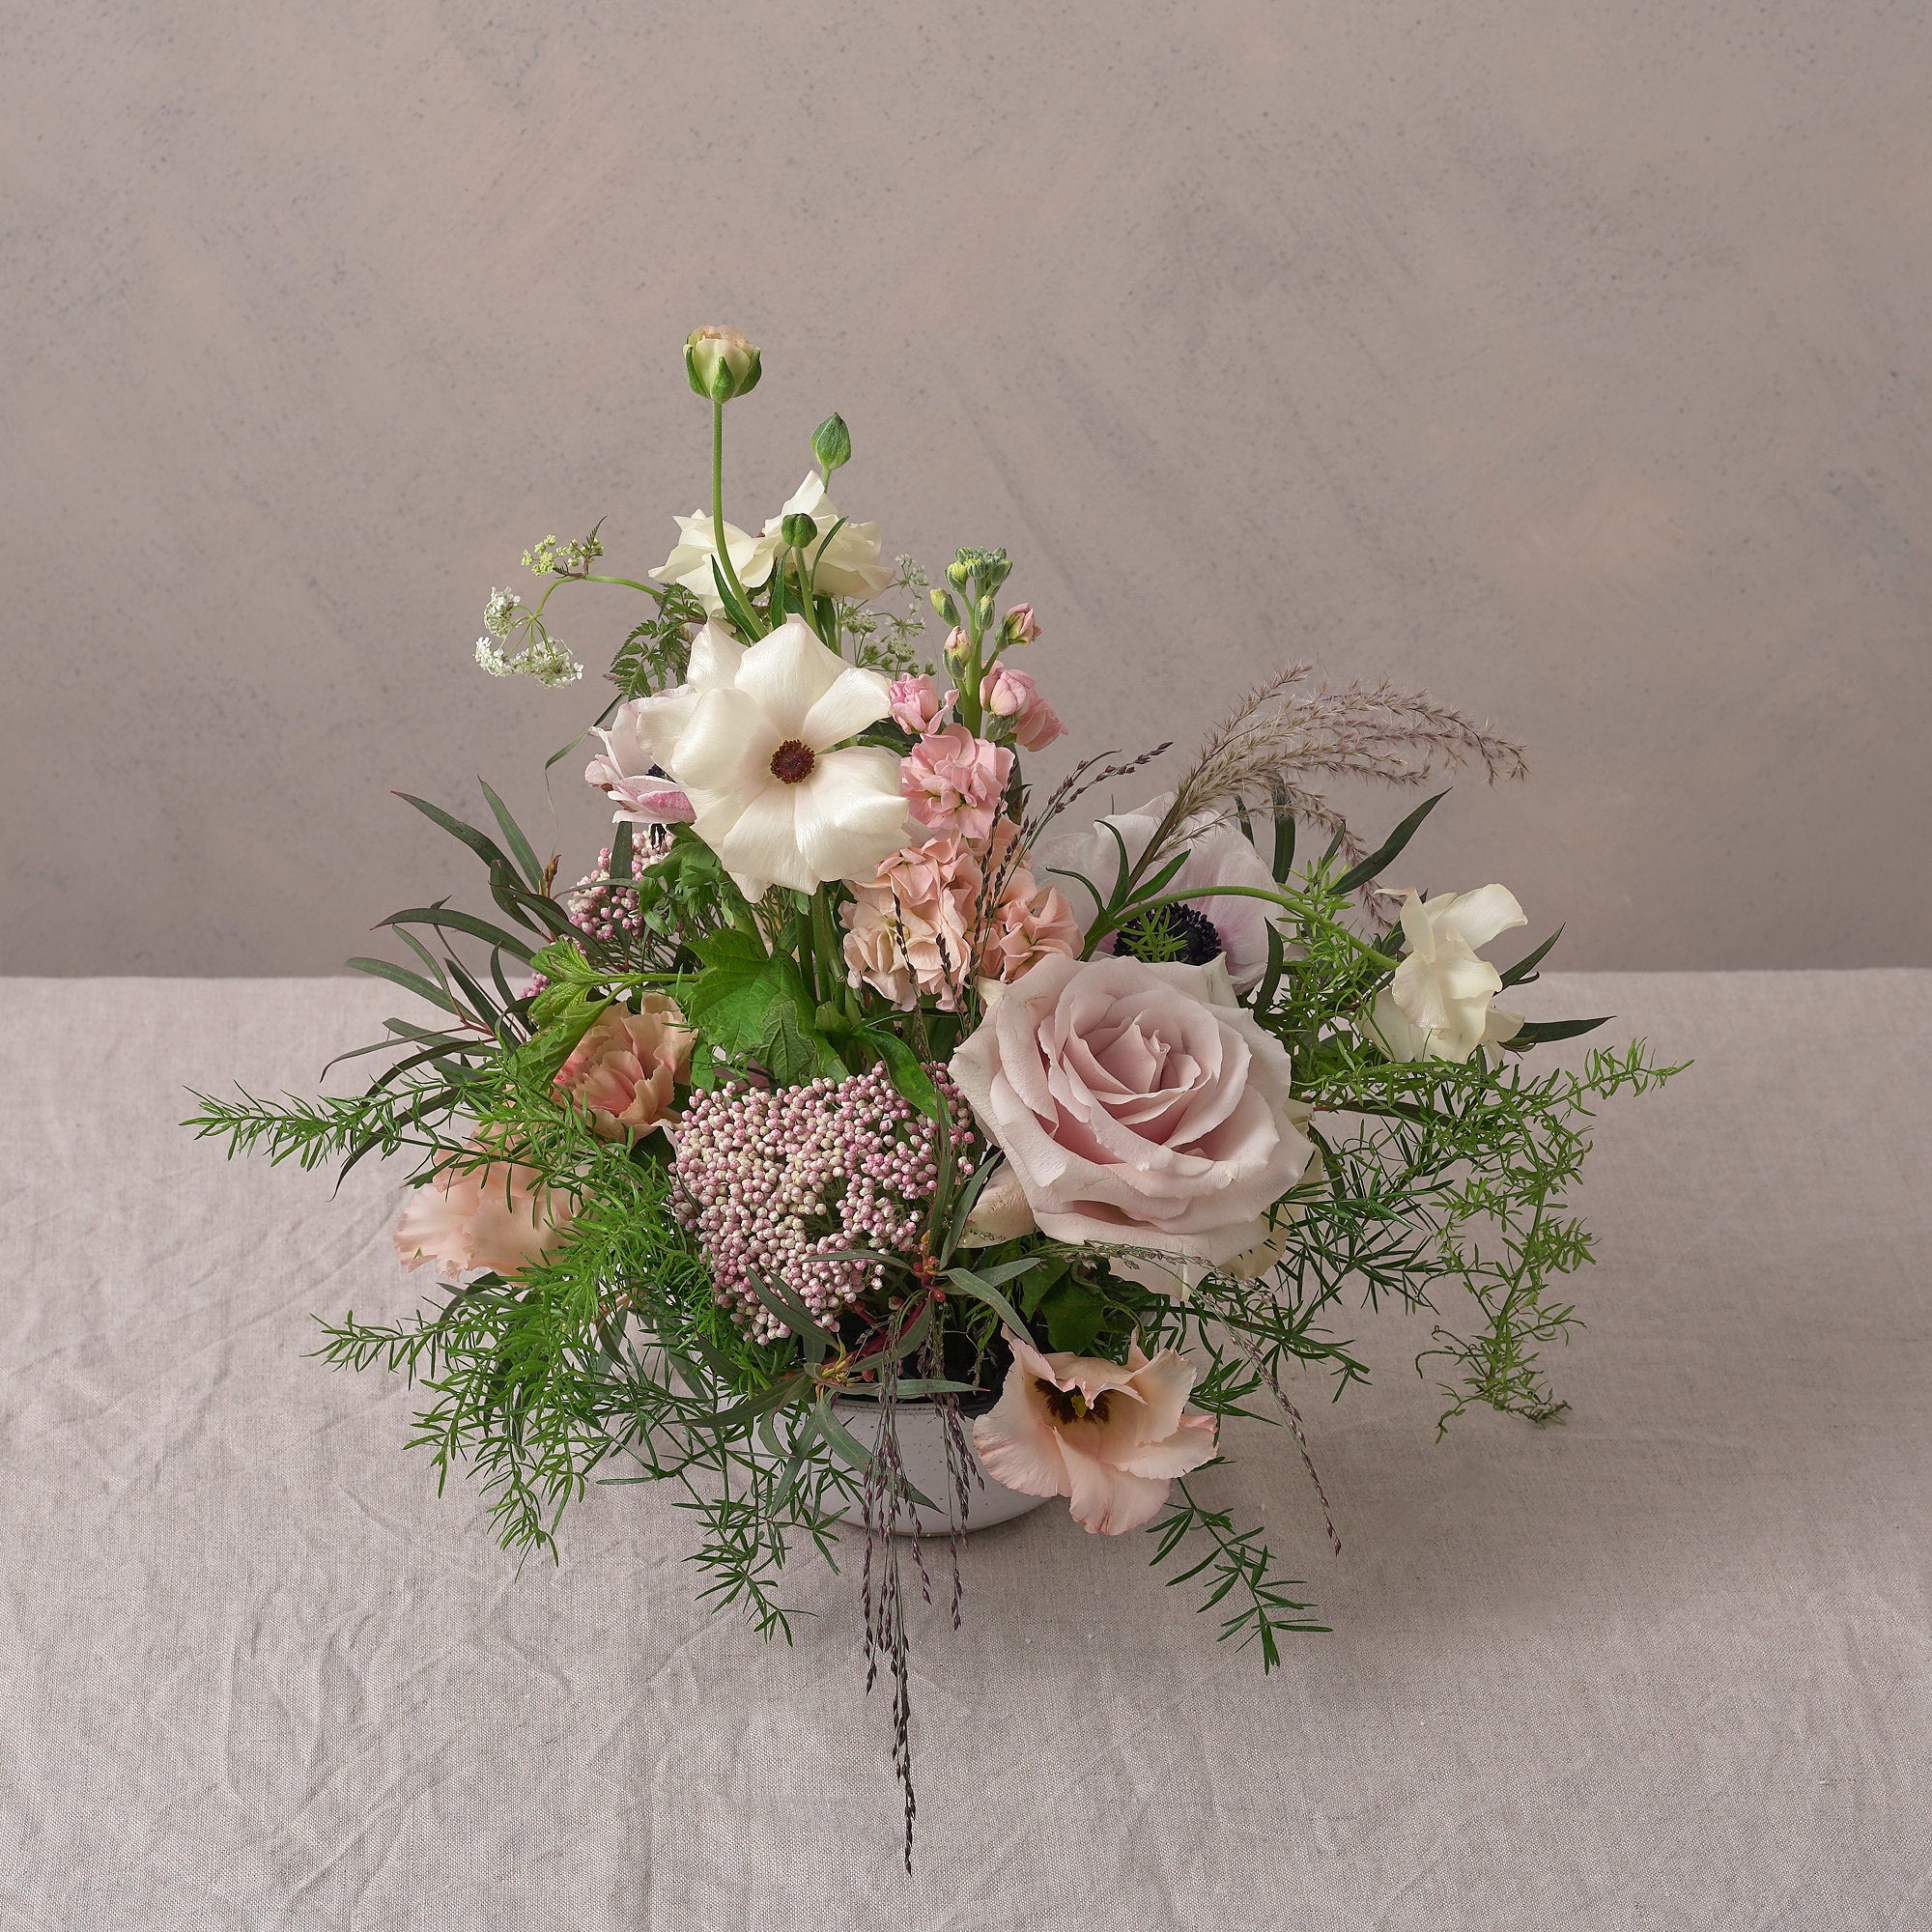 english country garden style flower bowl arrangement for weddings and events by Botanique Workshop